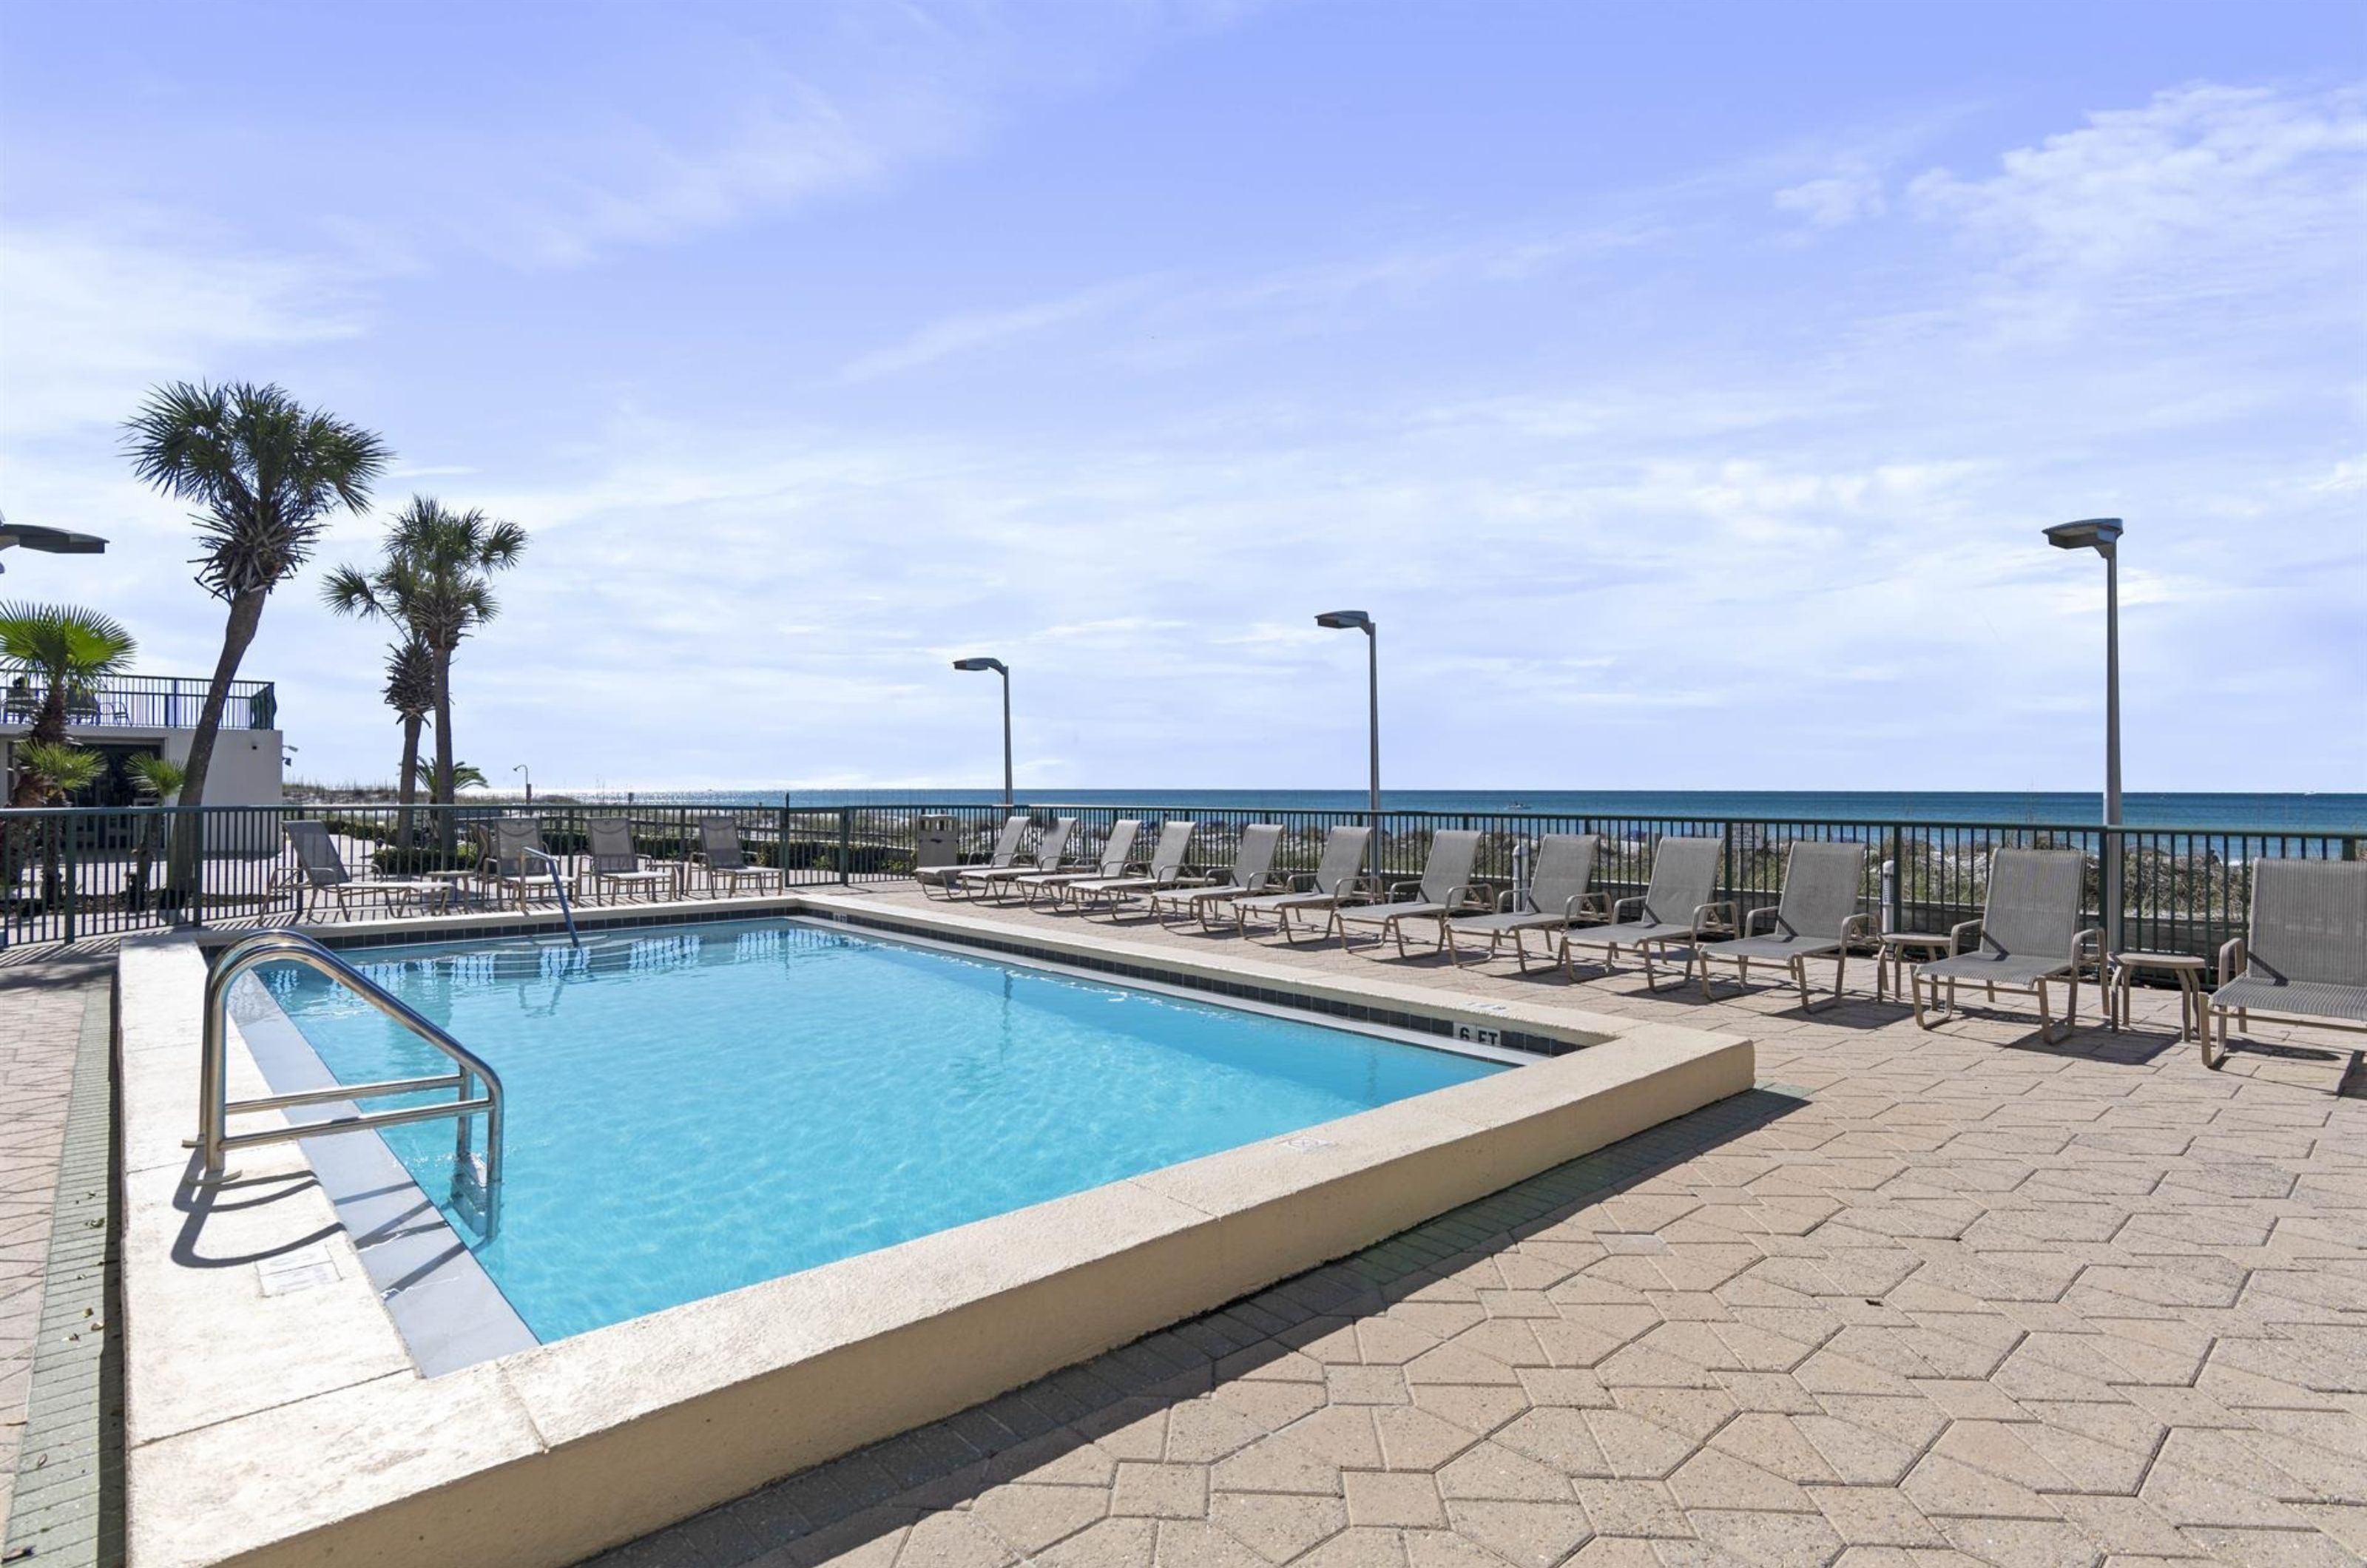 The outdoor swimming pool and pool deck at Destin Beach Club in Destin Florida 